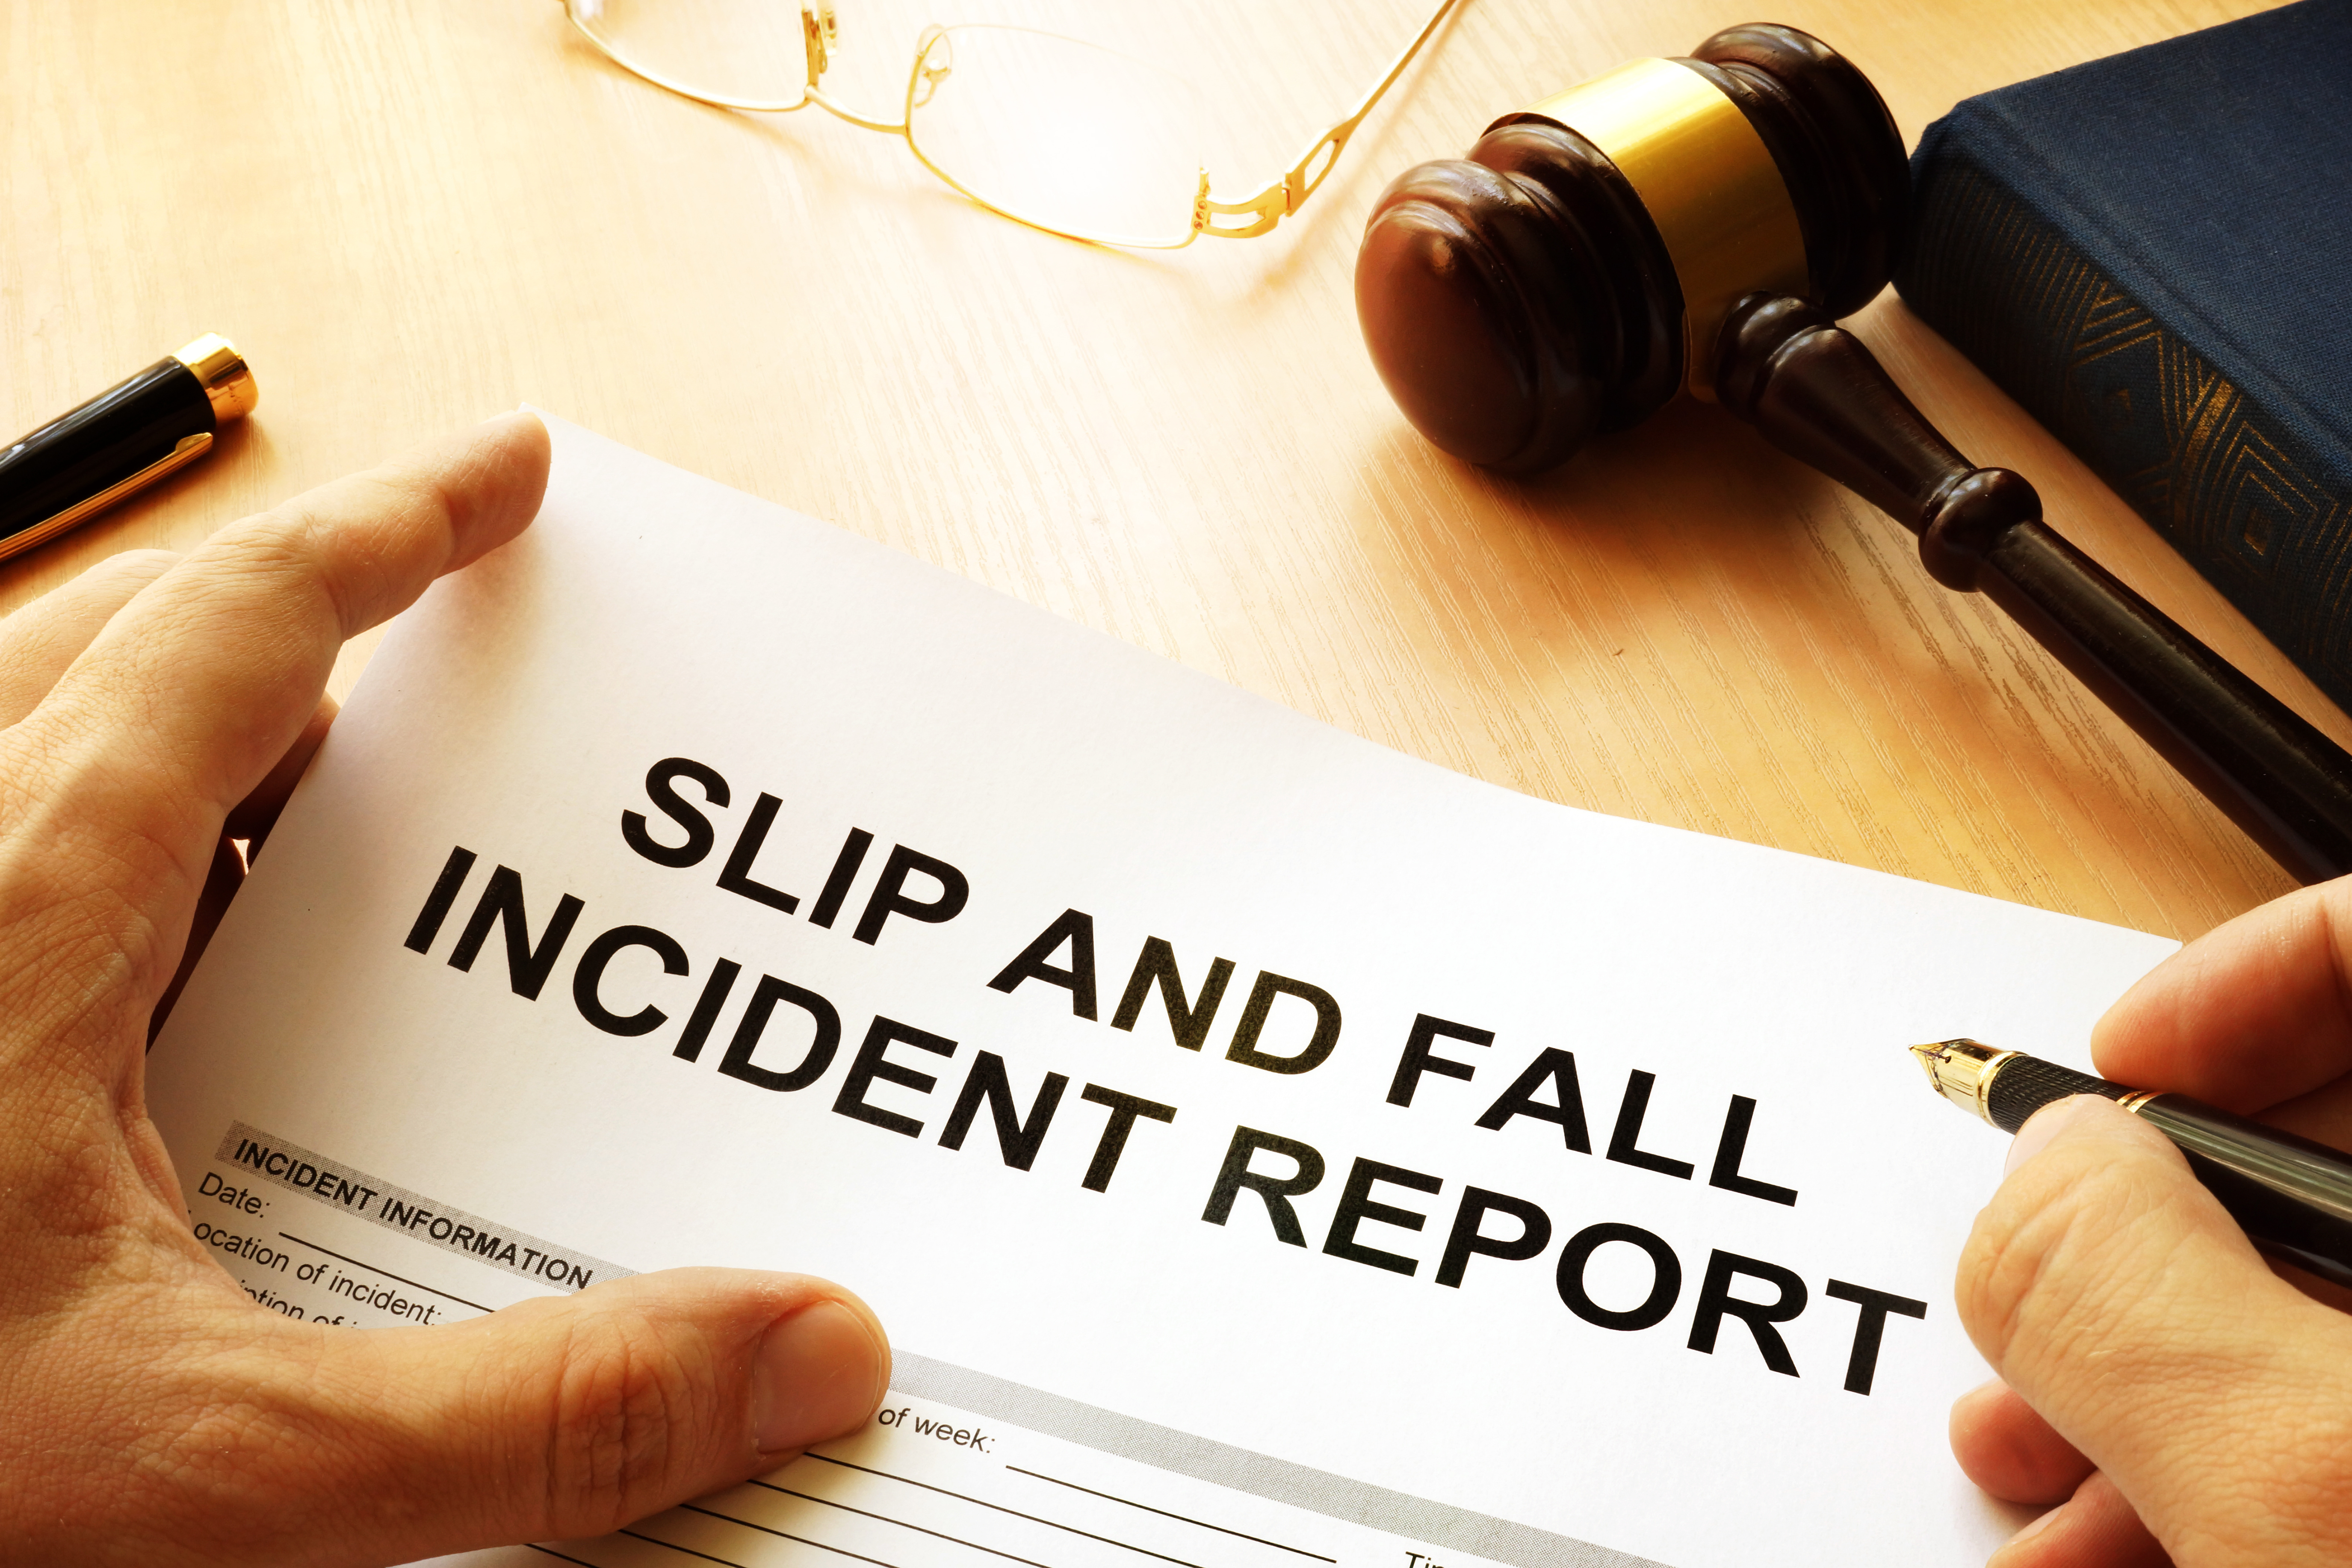 Slip and fall personal injury lawyers in California